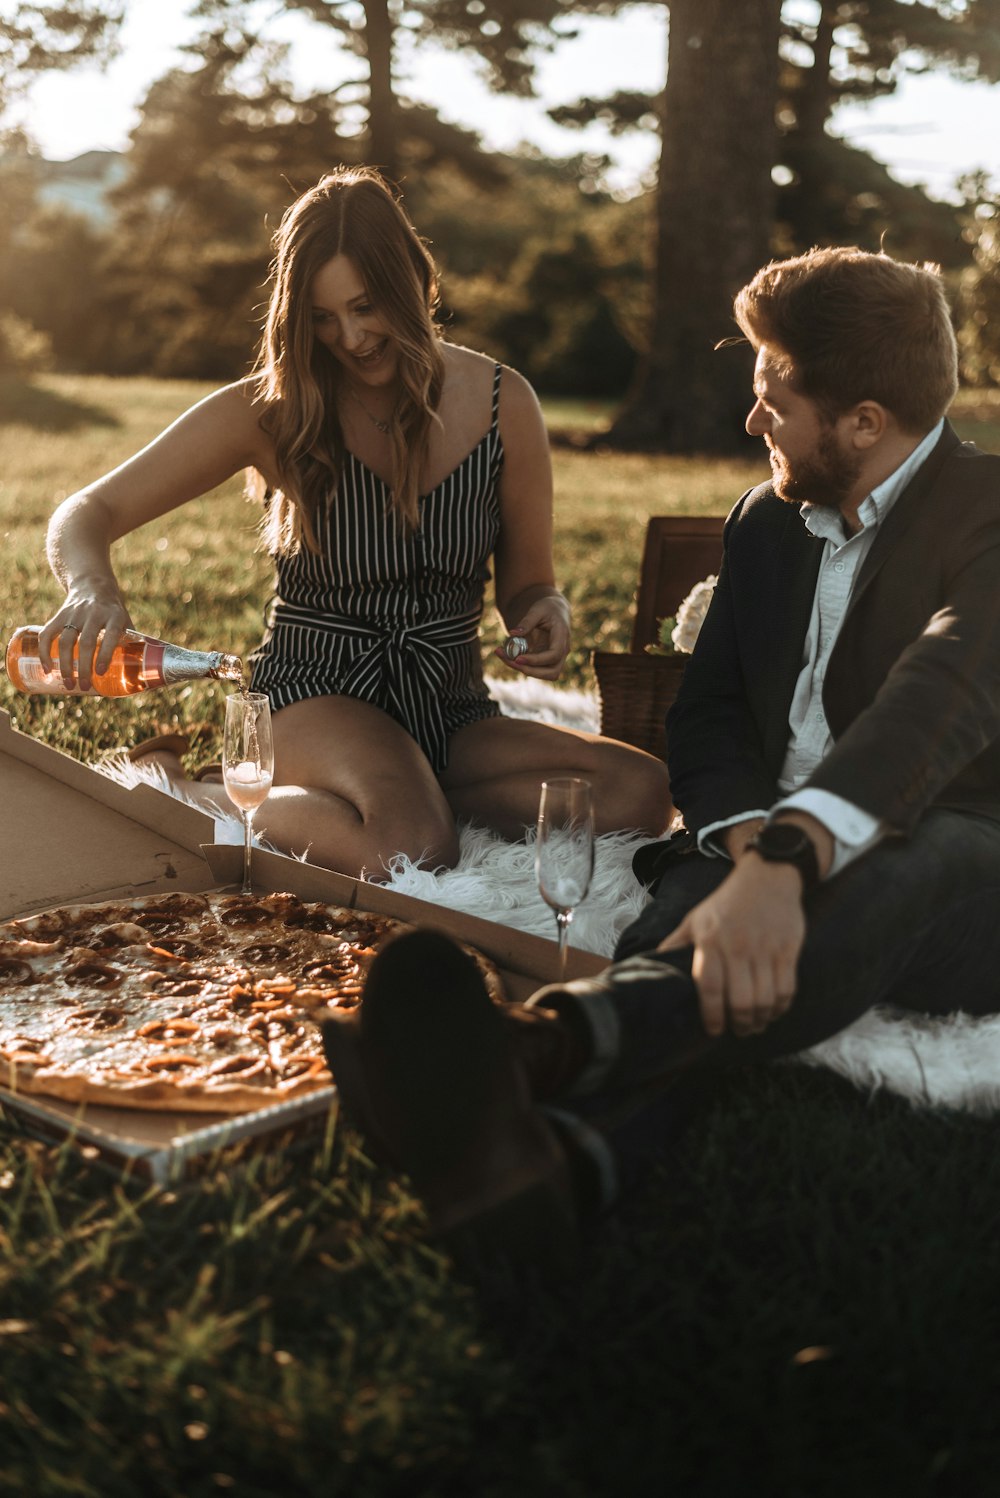 a man and a woman sitting on the grass eating pizza